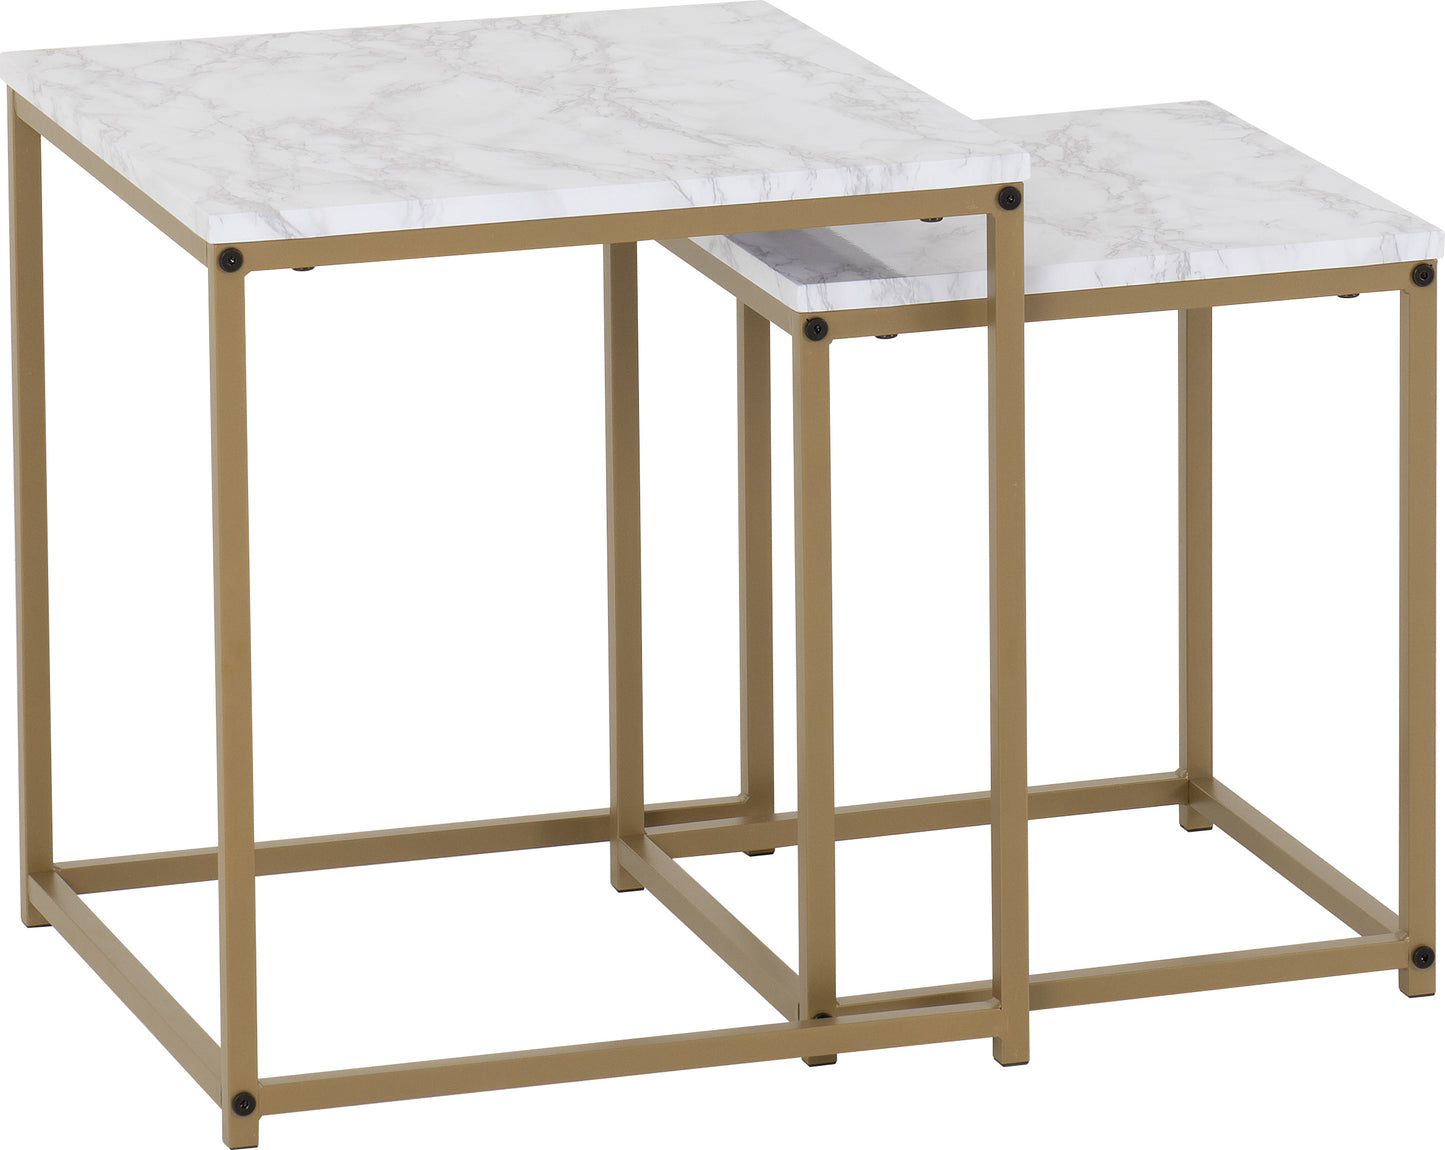 DALLAS NEST OF 2 TABLES - MARBLE/GOLD EFFECT